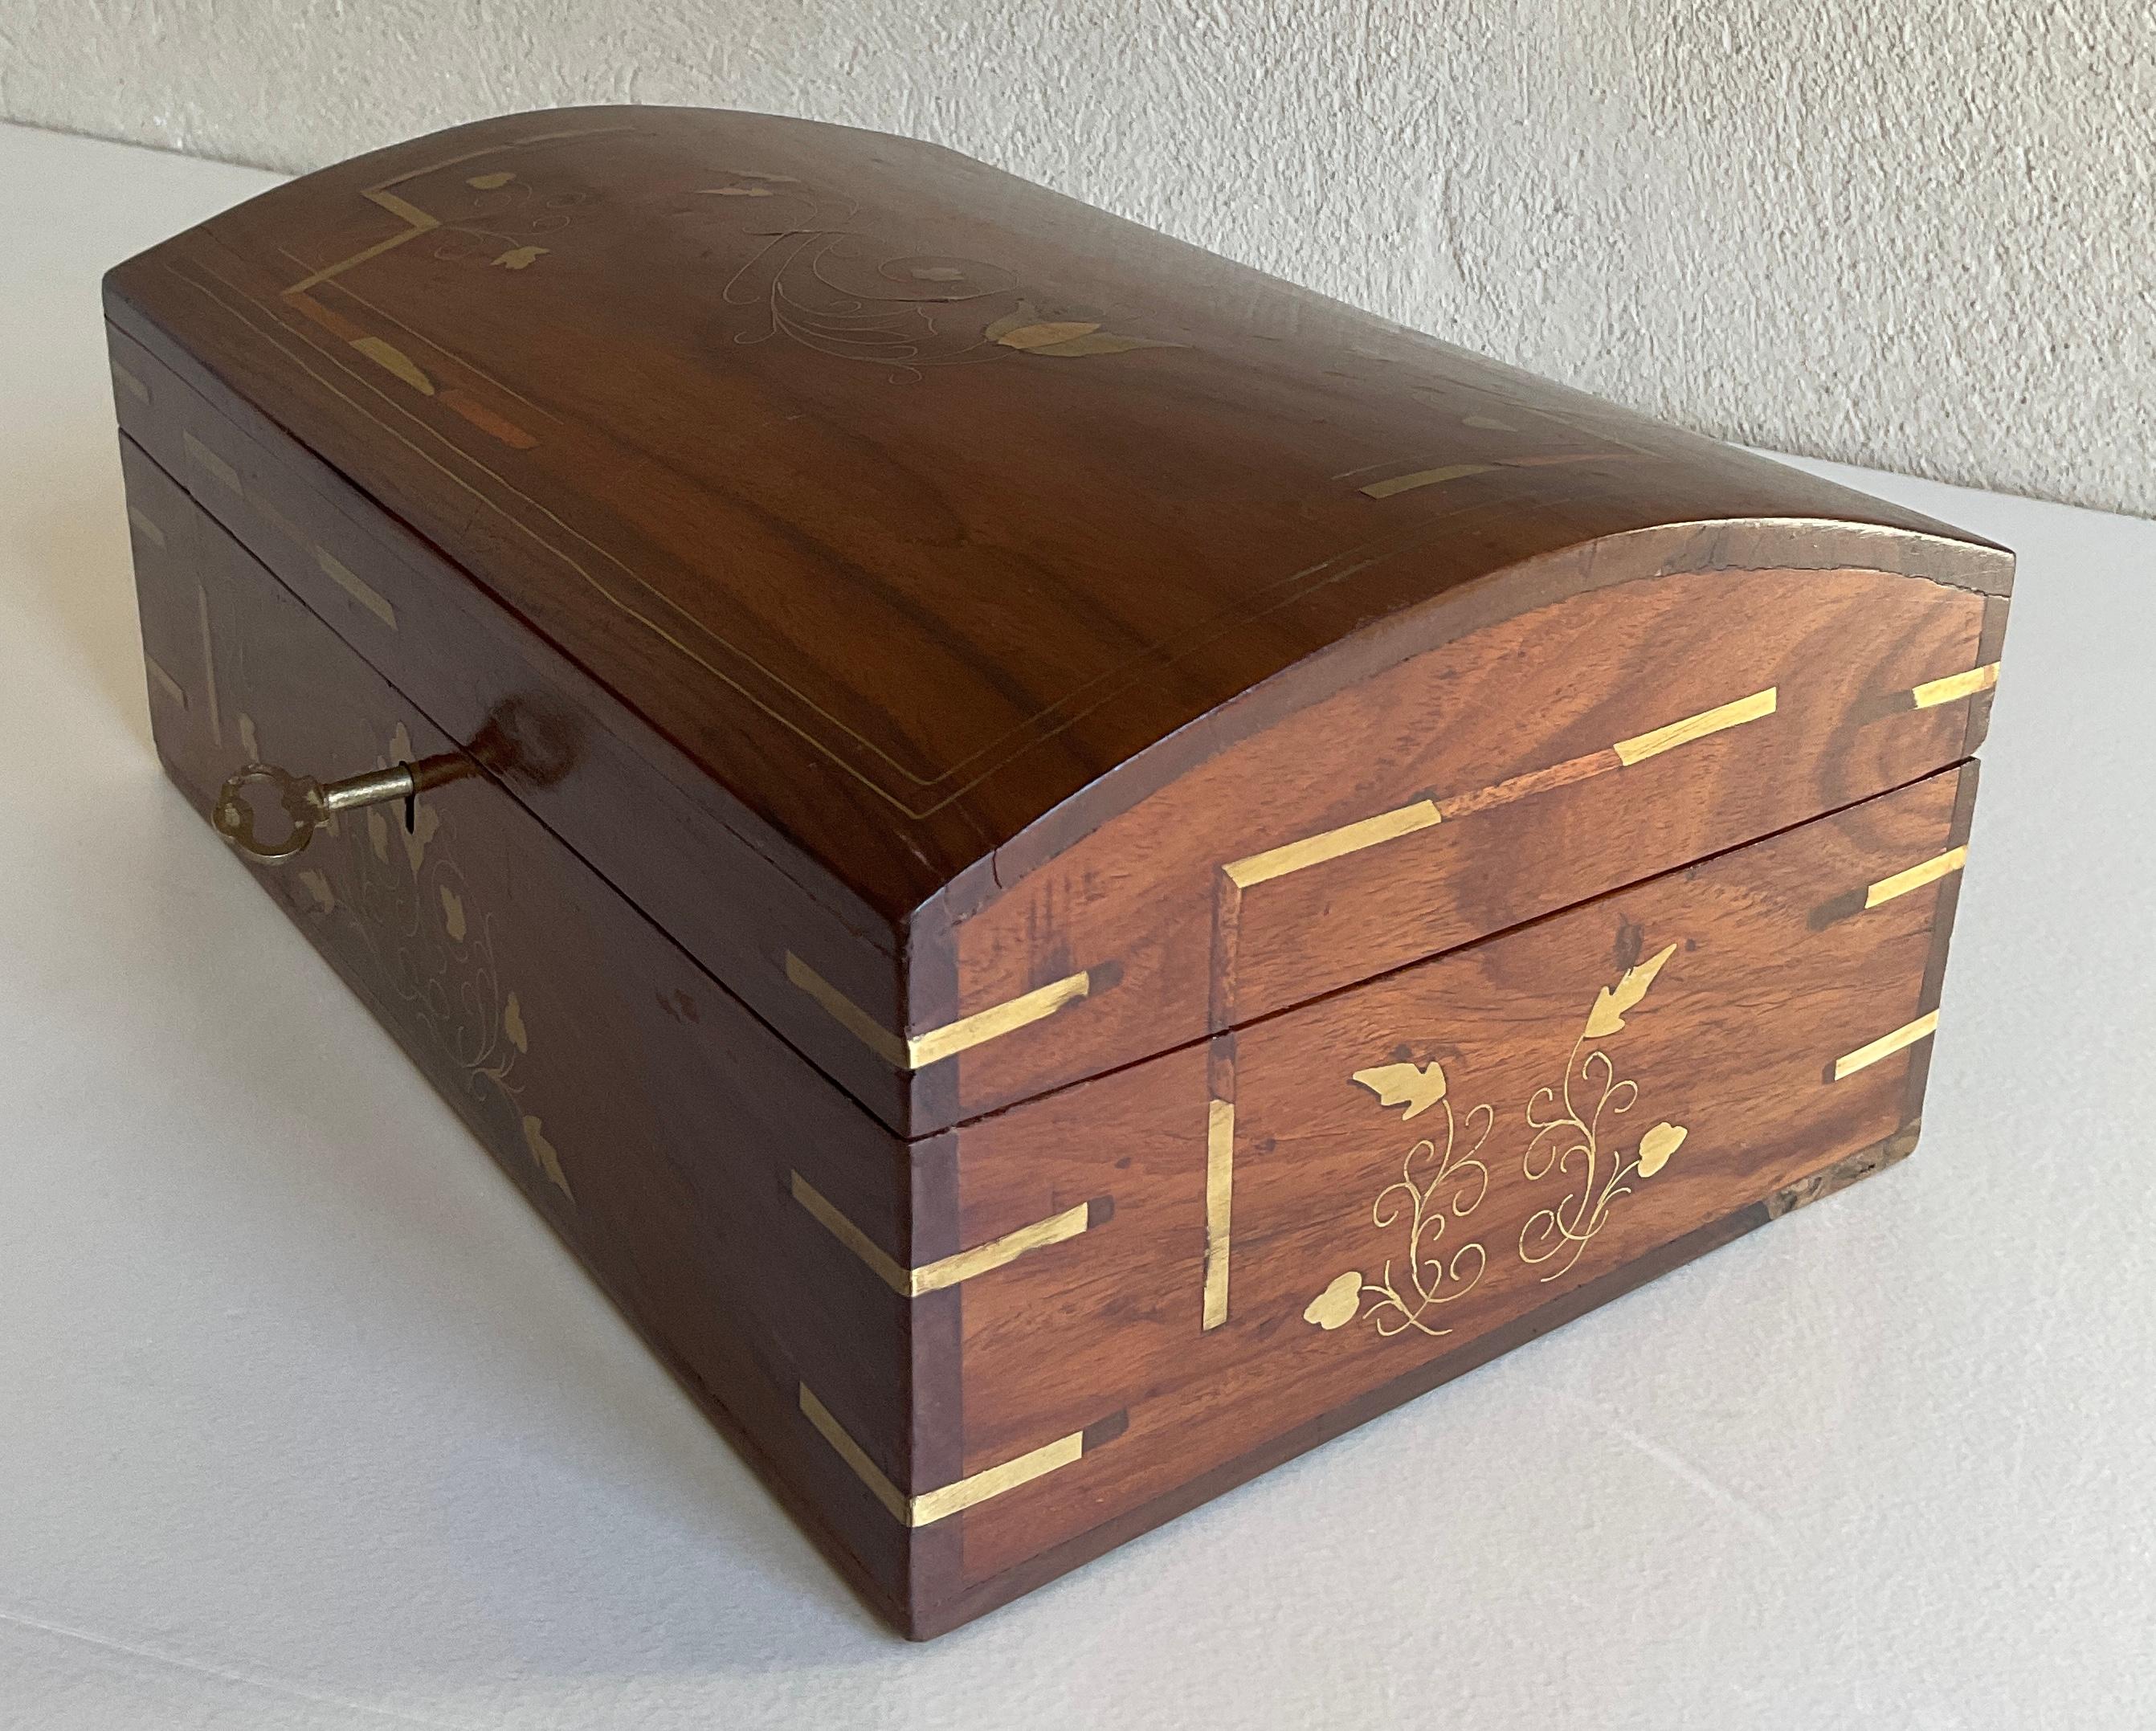 A large and very good quality French Art Deco style jewelry box made of walnut with fruitwood inlay. Hand-crafted with an eye to details. Great craftsmanship.

This beautiful box is perfect for storing your jewelry and any other keepsakes.